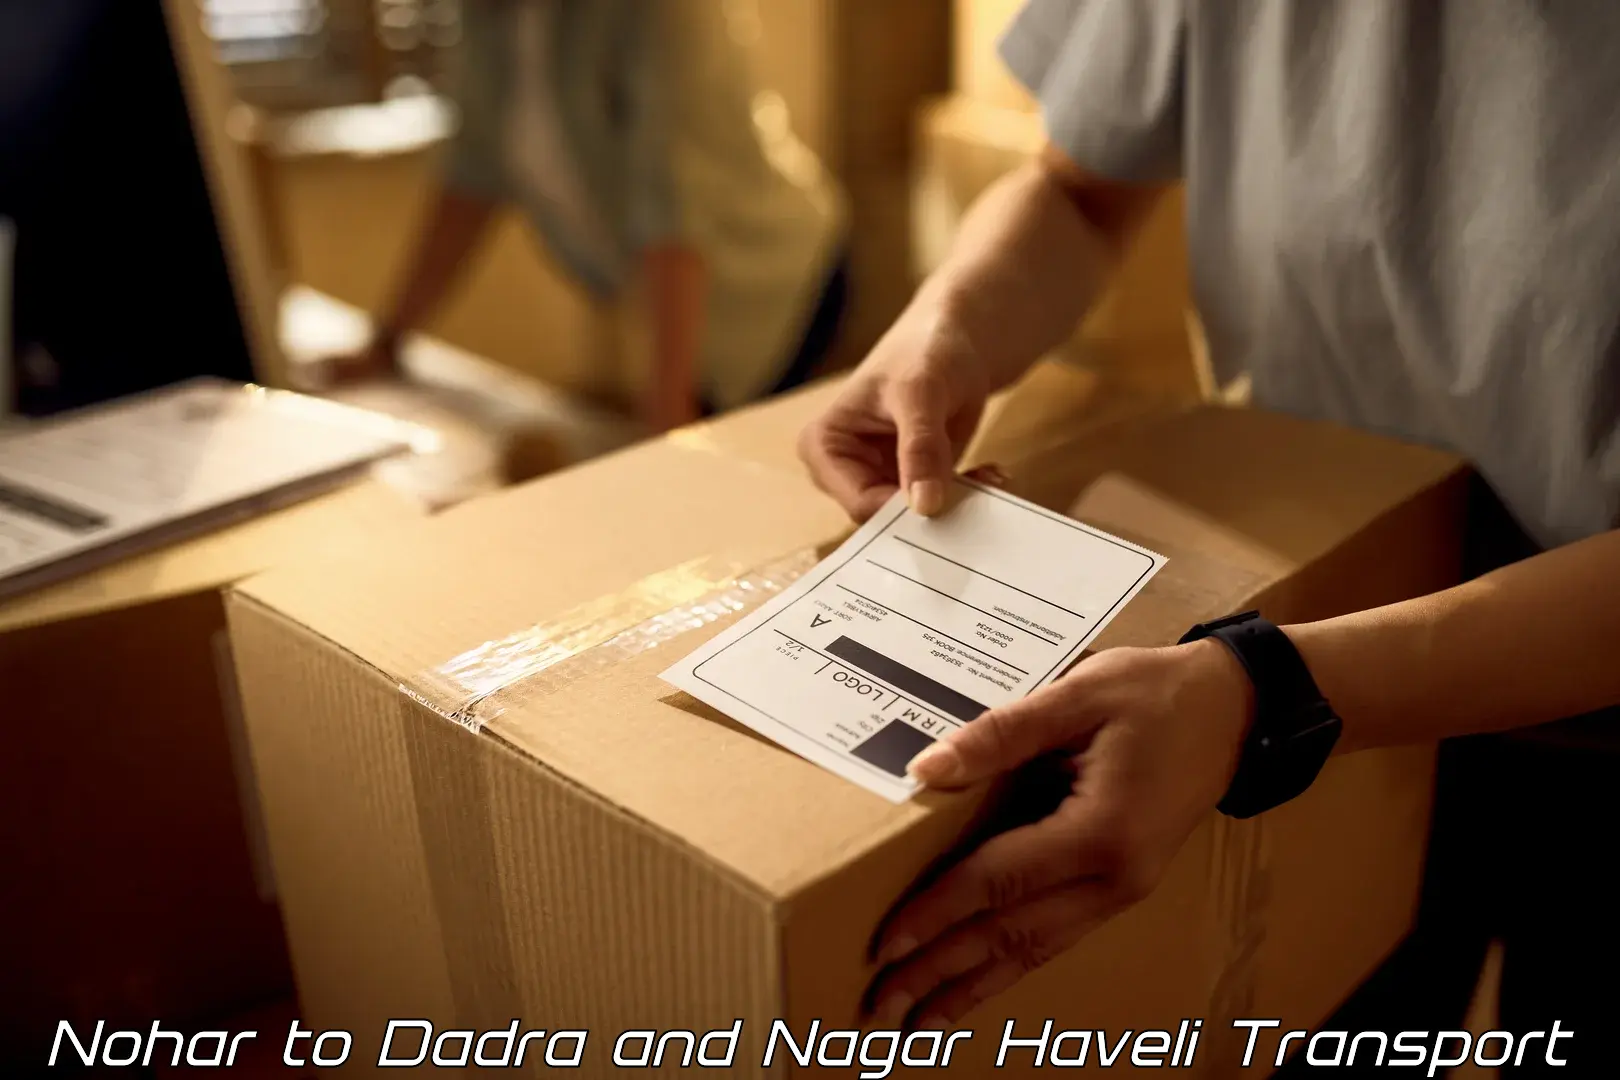 Road transport online services Nohar to Dadra and Nagar Haveli